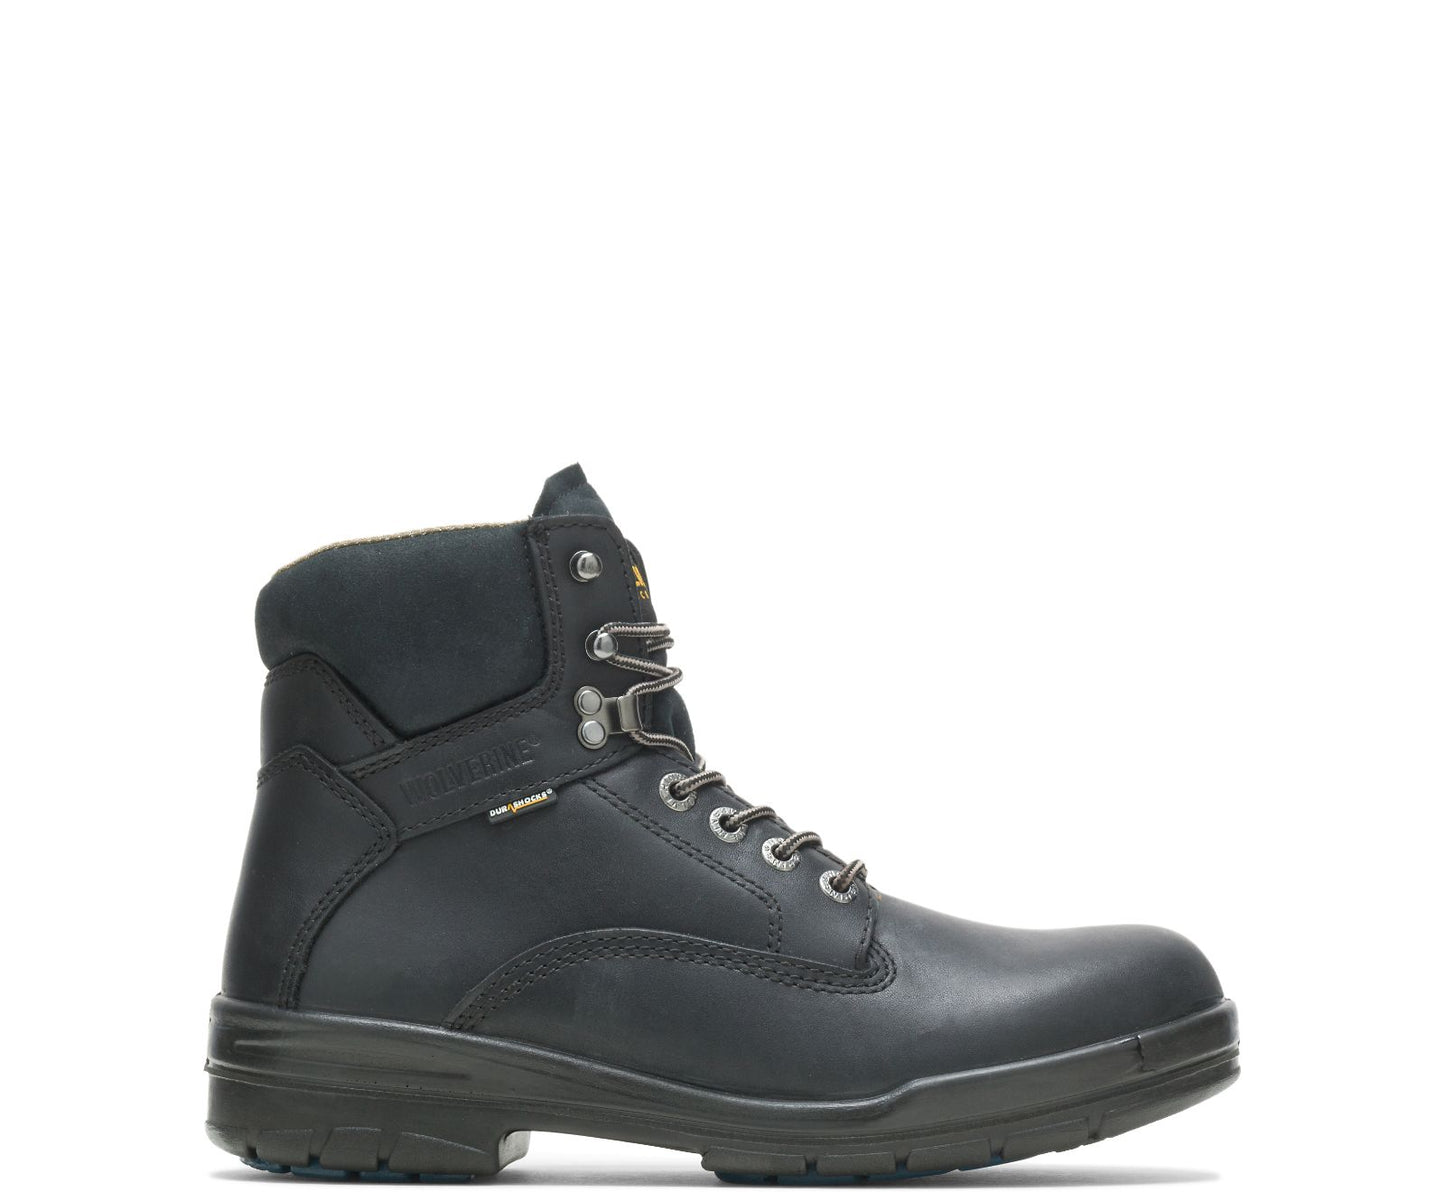 3123 Wolverine Leather Soft Toe Work Boots (Black)